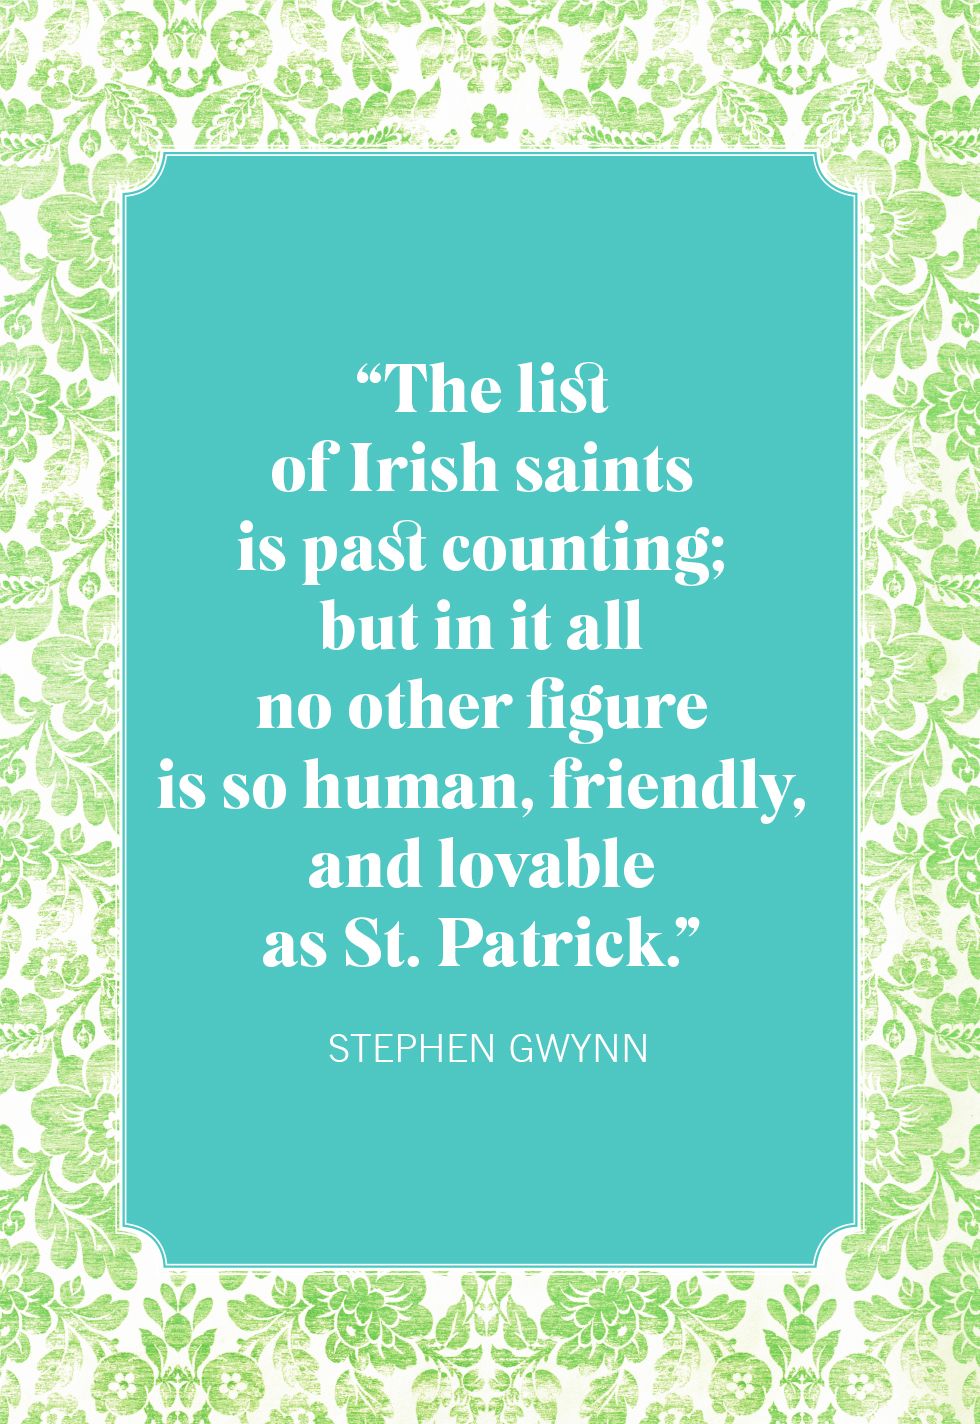 Quotes about st patricks day